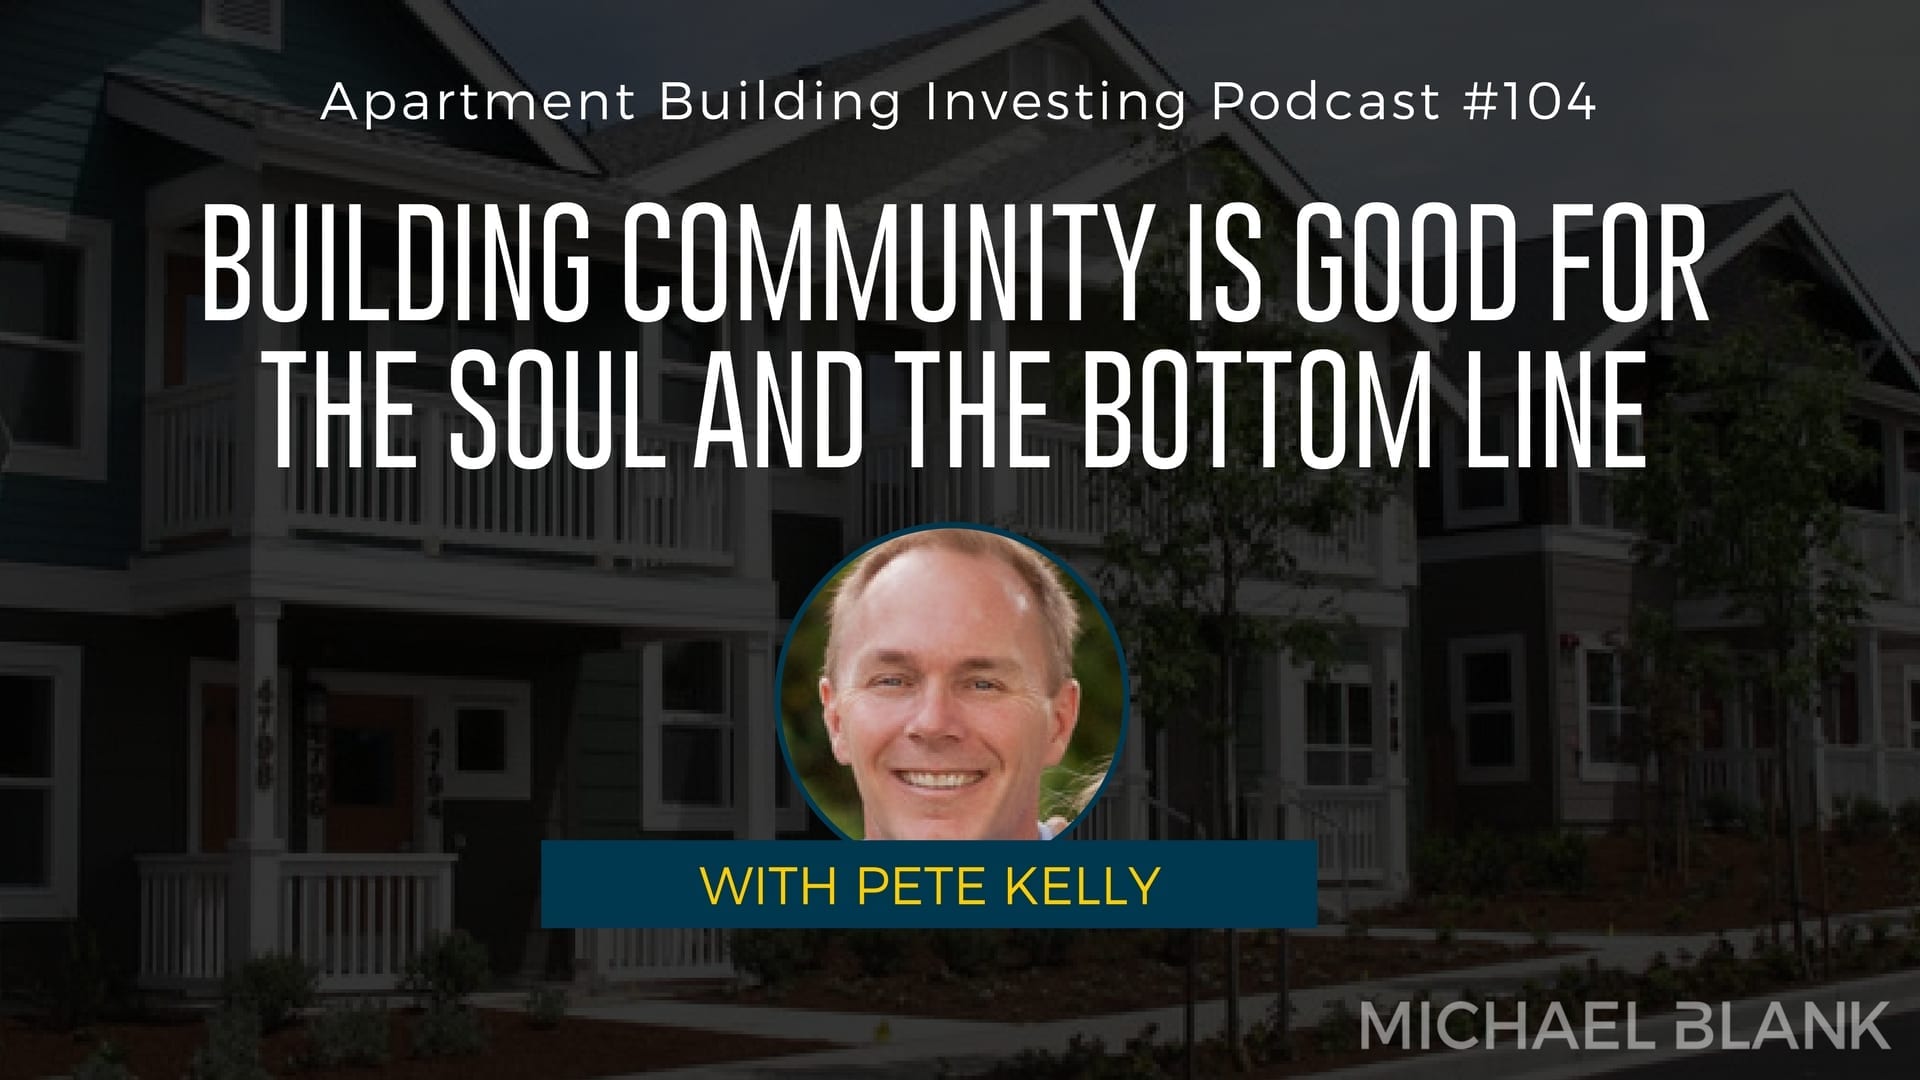 MB 104: Building Community is Good for the Soul AND the Bottom Line – With Pete Kelly